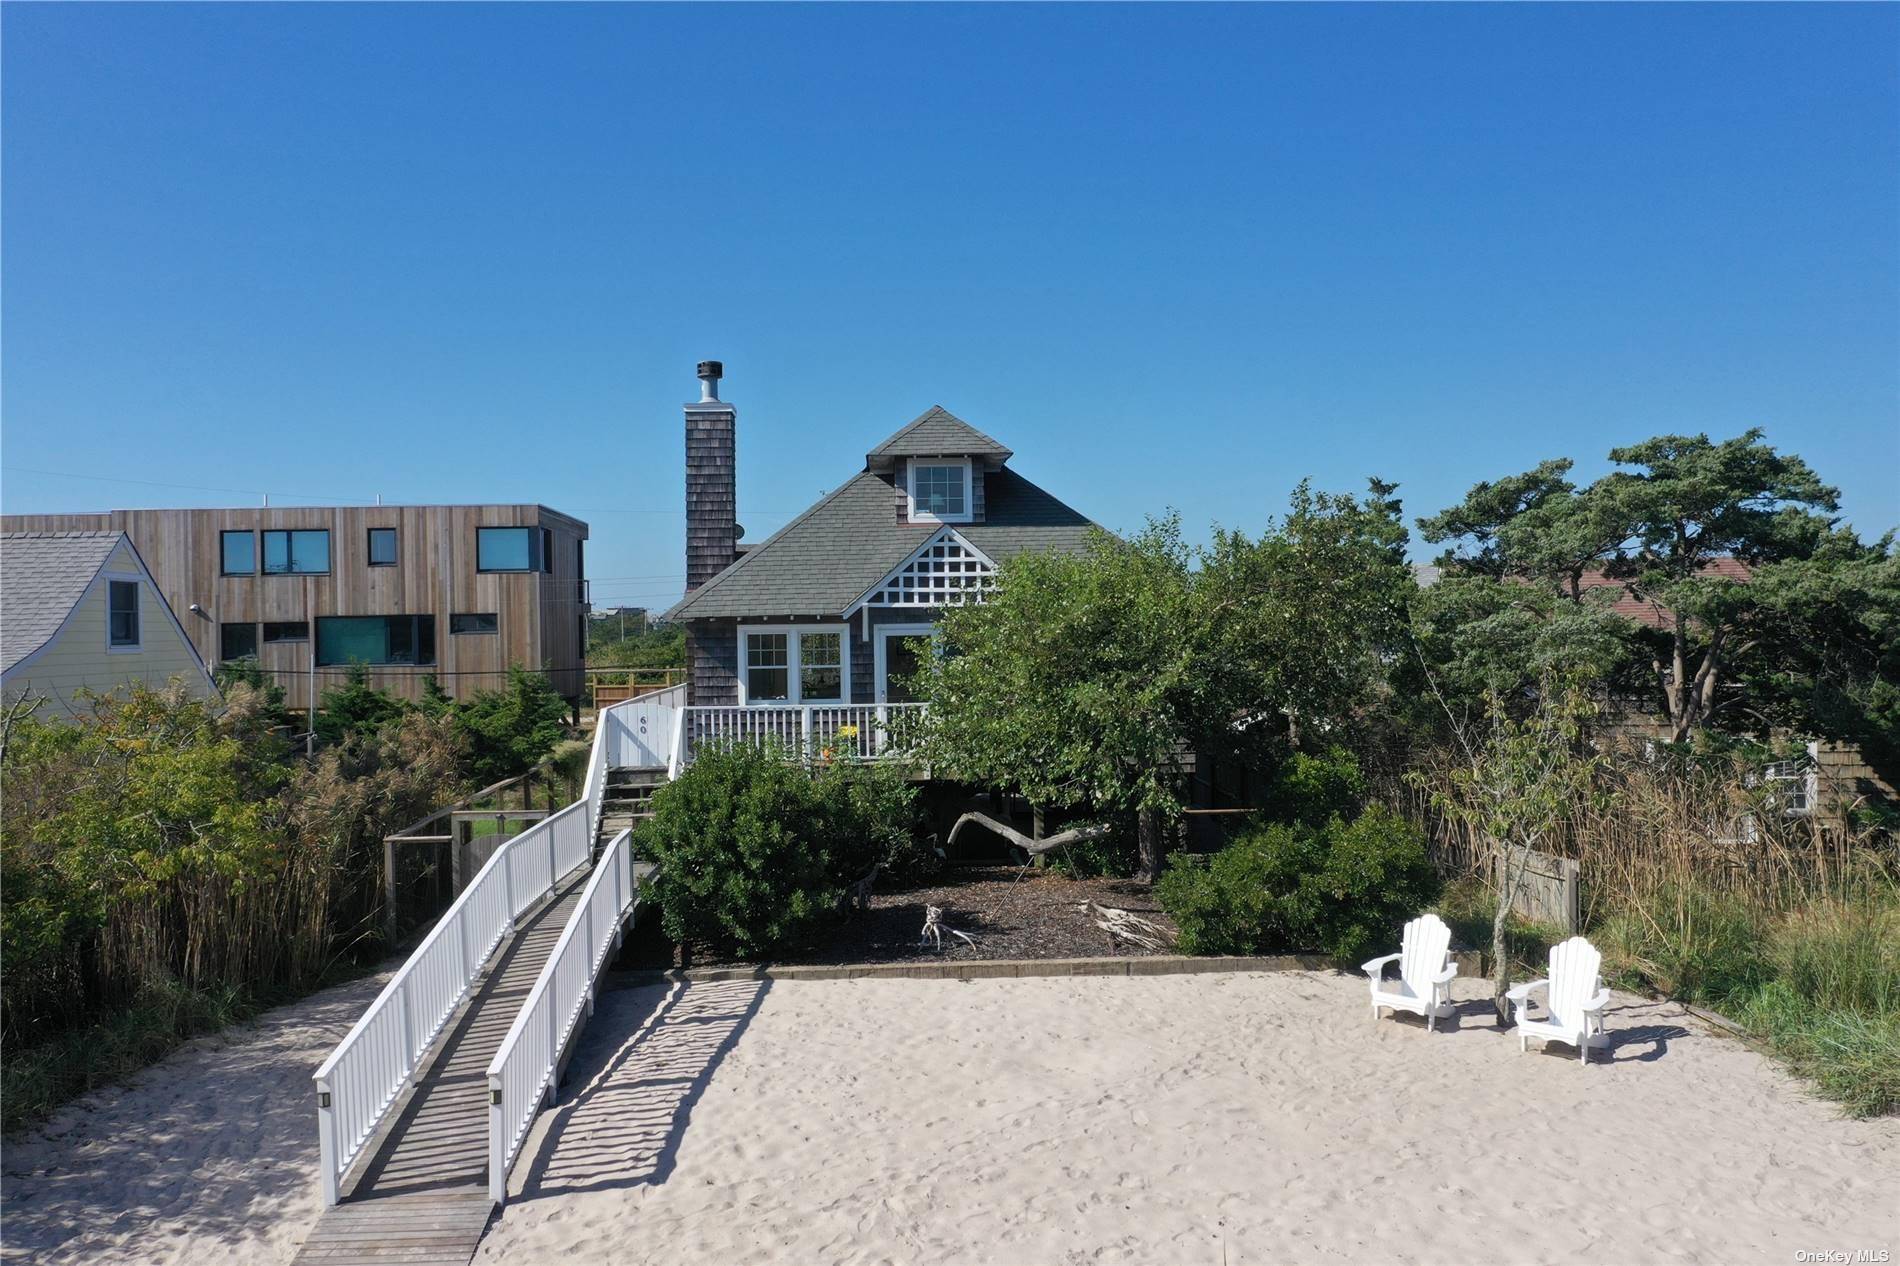 Nestled in the private community of Robbins Rest, this beach house boasts a sundrenched open floorplan from front to back, perfect for entertaining.